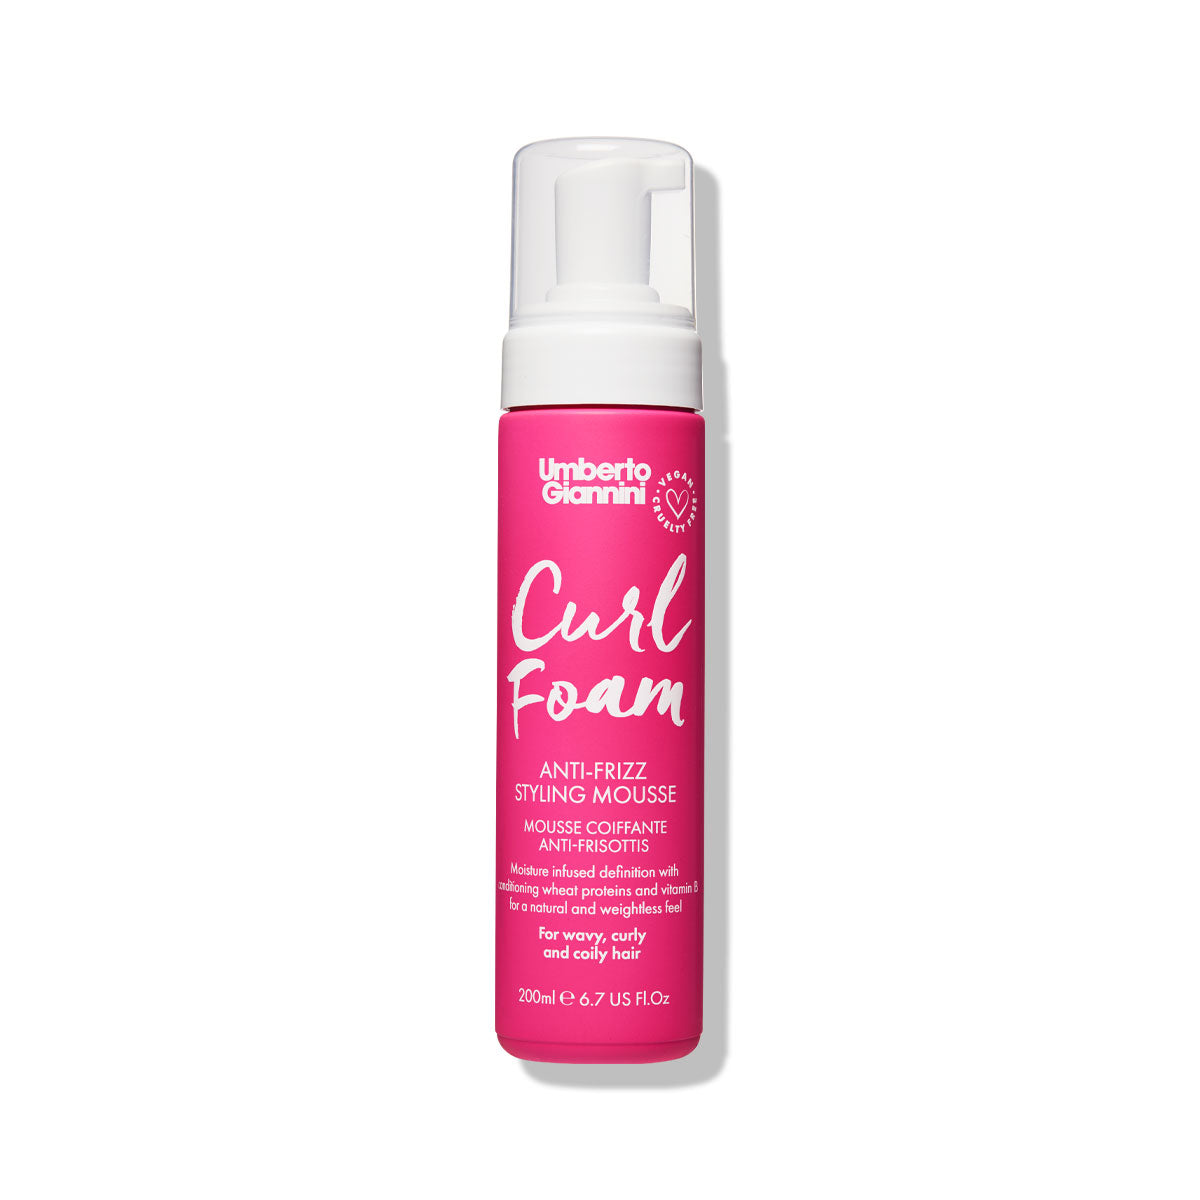 EveryBODY Wash Now! Moisture Mousse All-Over Cleanser